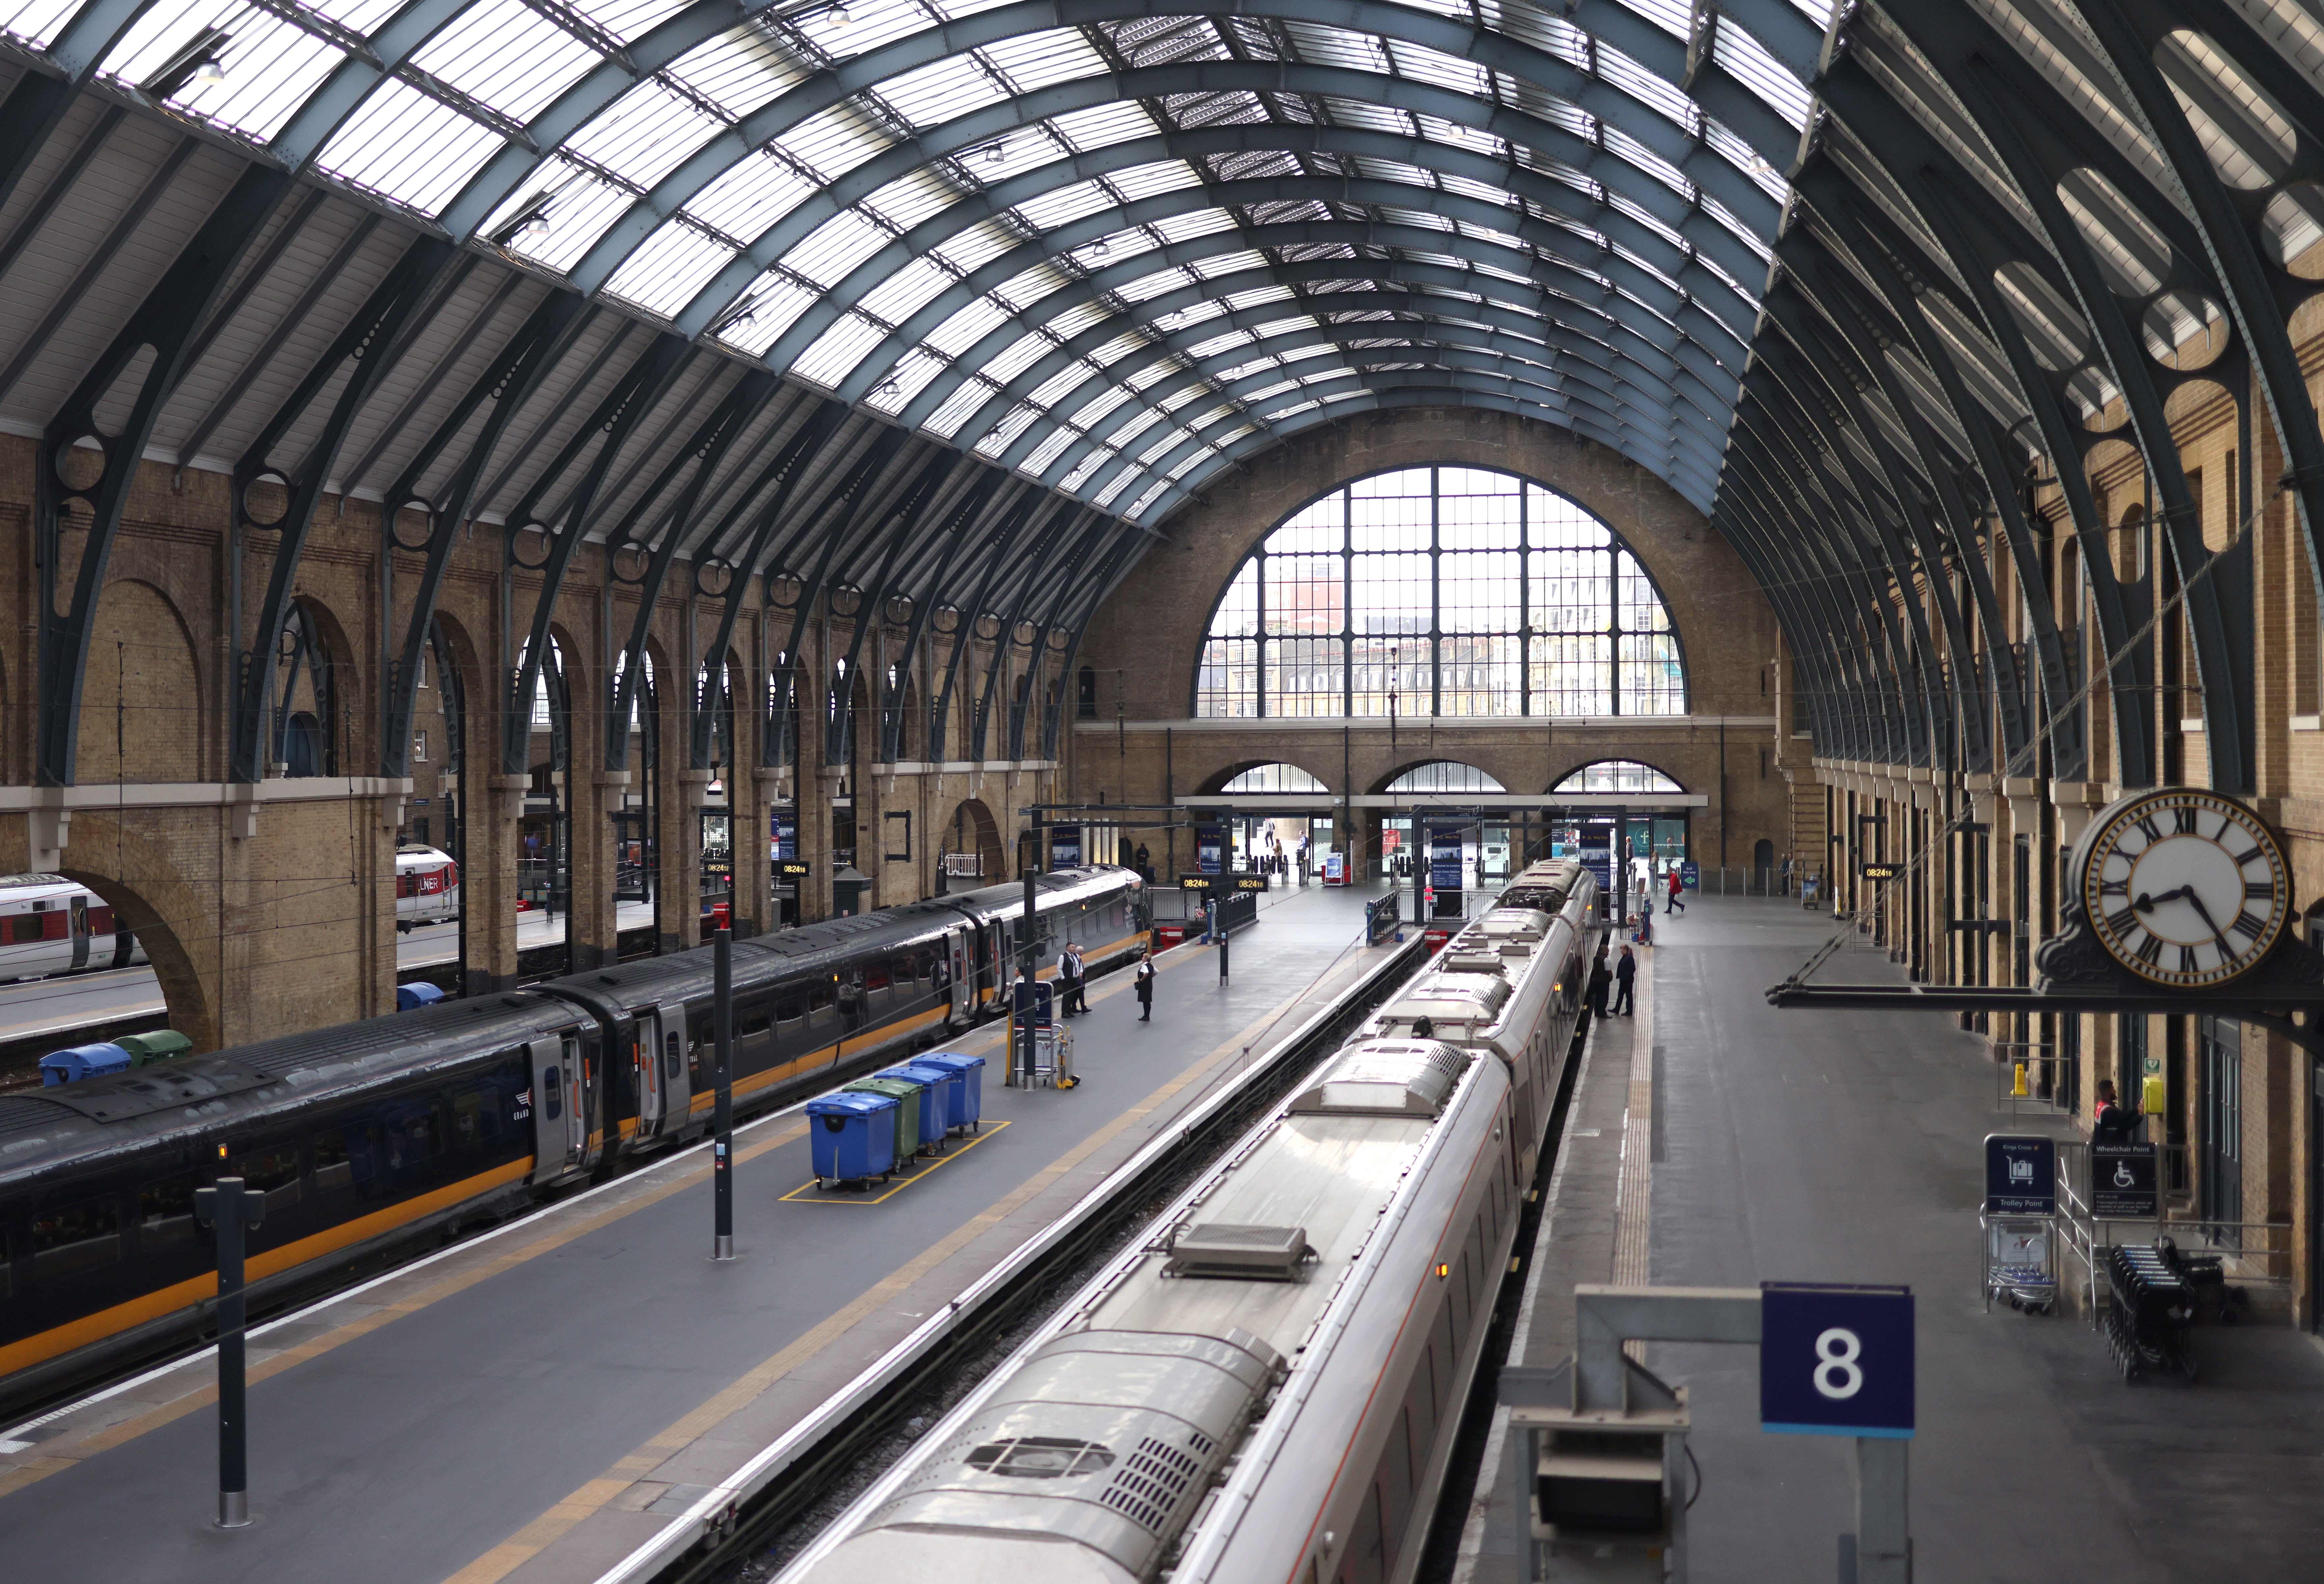 Trains wait on platforms at Kings Cross station in London